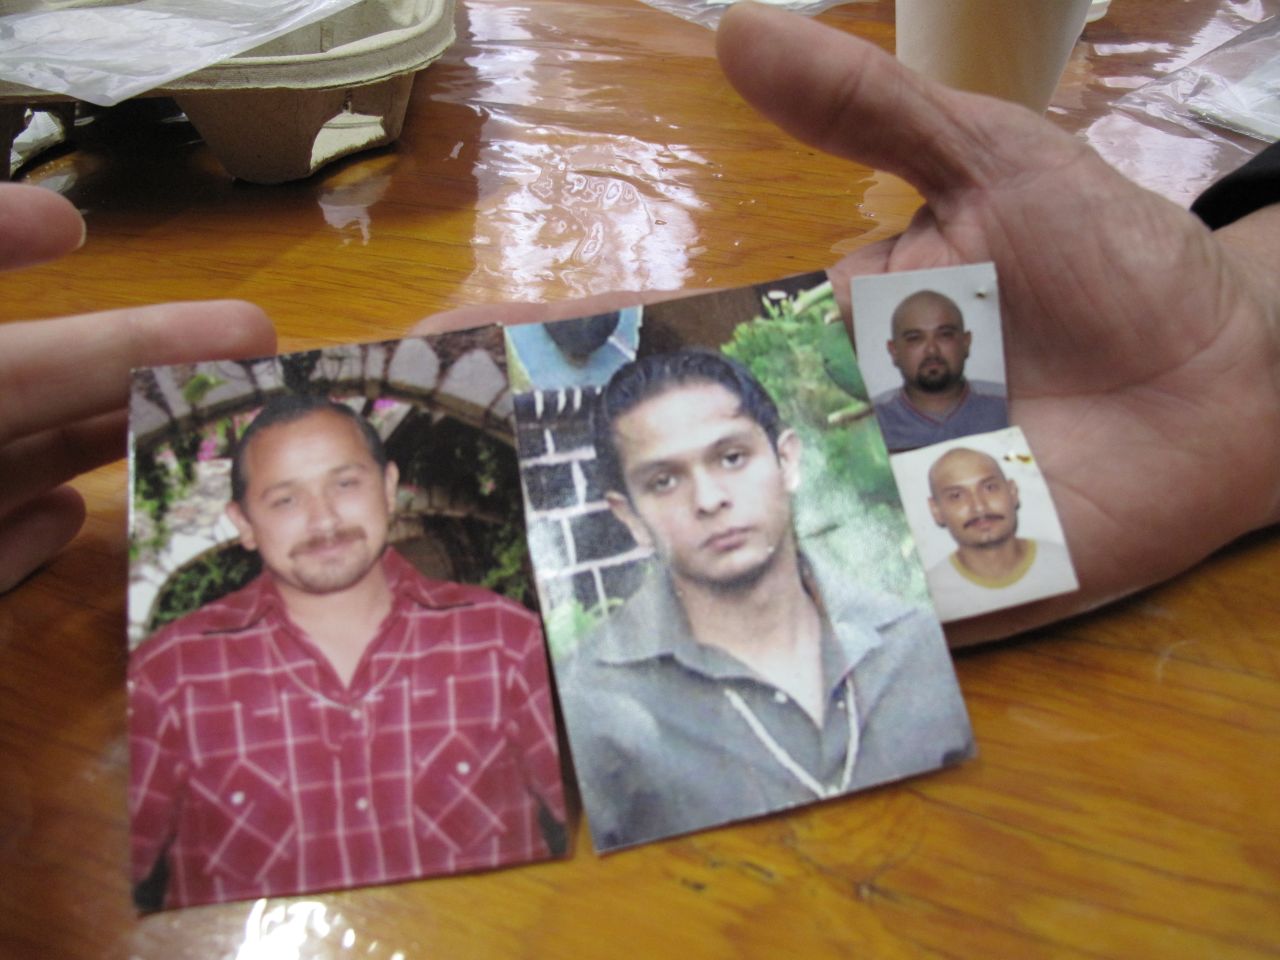 Maria Herrera Magdalena holds photos of her four missing children: Salvador, Raul, Gustavo and Luis Armando. "When I start to talk about my sons, I can't stop crying," she says.